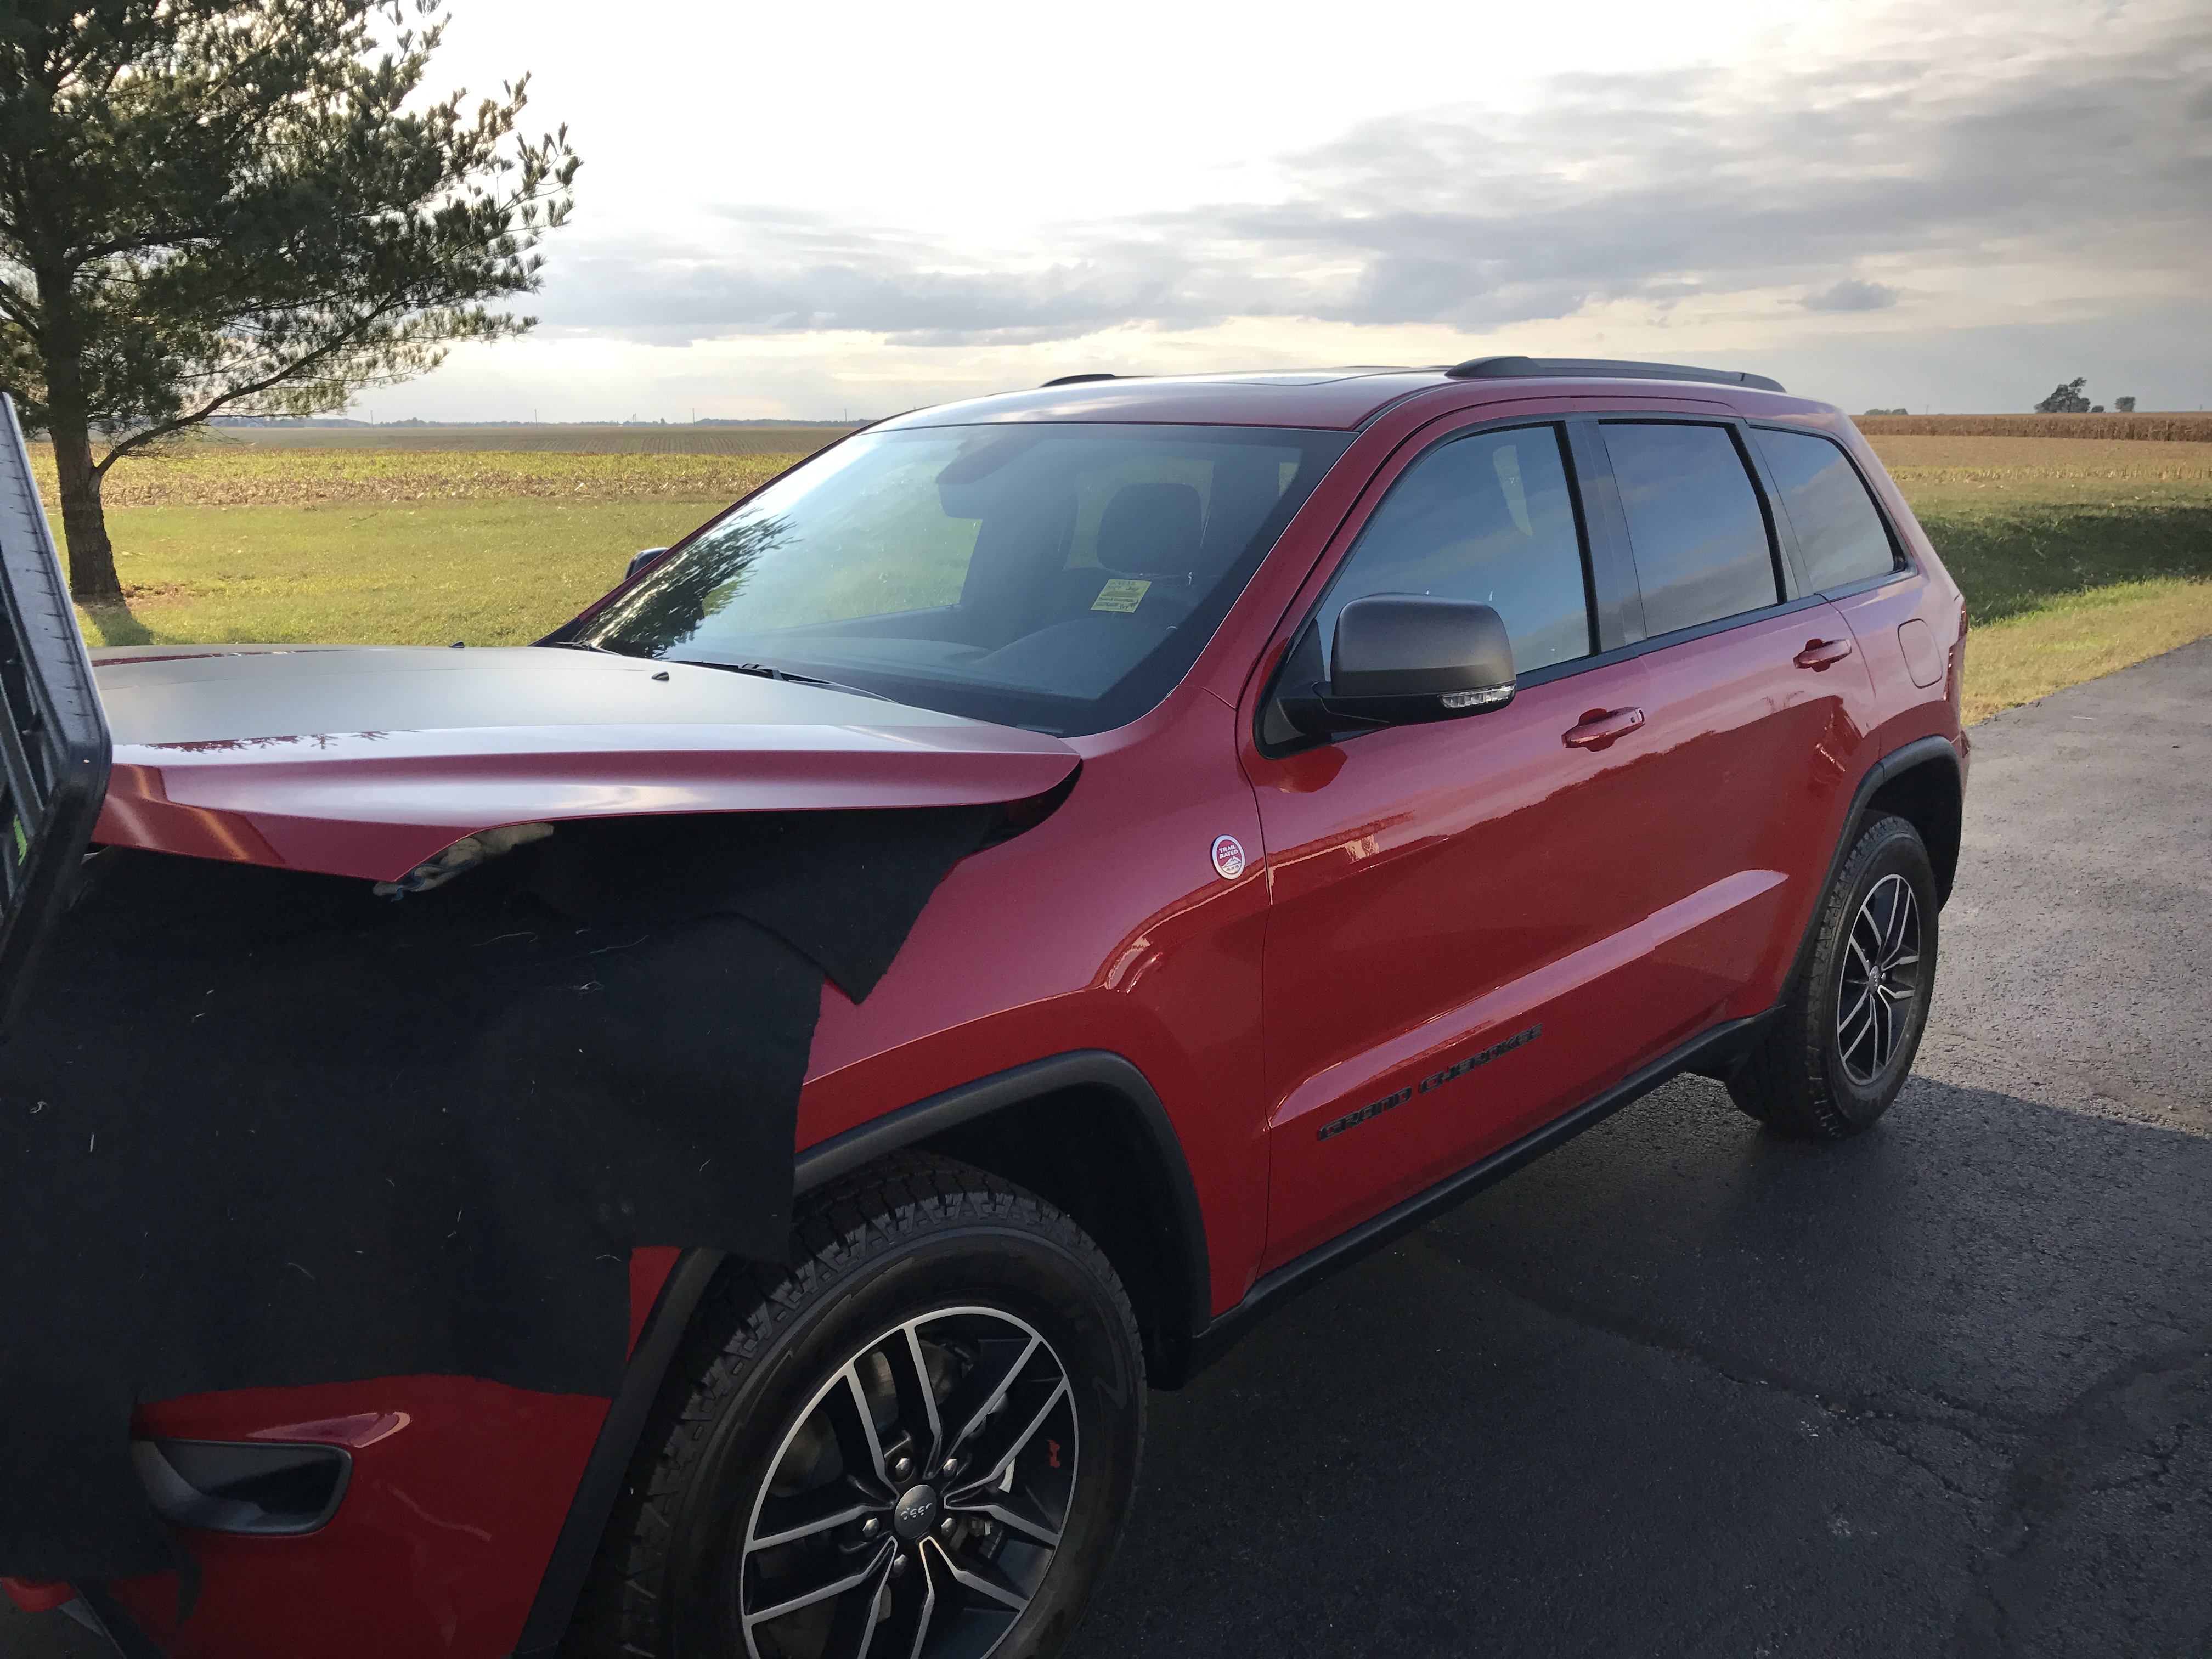 2017 Jeep Grand Cherokee Trailhawk New Vehicel dent removal, this is the before image. Michael was called in to remove this dent at a dealership, to maintain value and to maintain the vehicle's original paint.. http://217dent.com Serving Springfield, Decatur, Taylorville, and surrounding areas. (Set up Image)